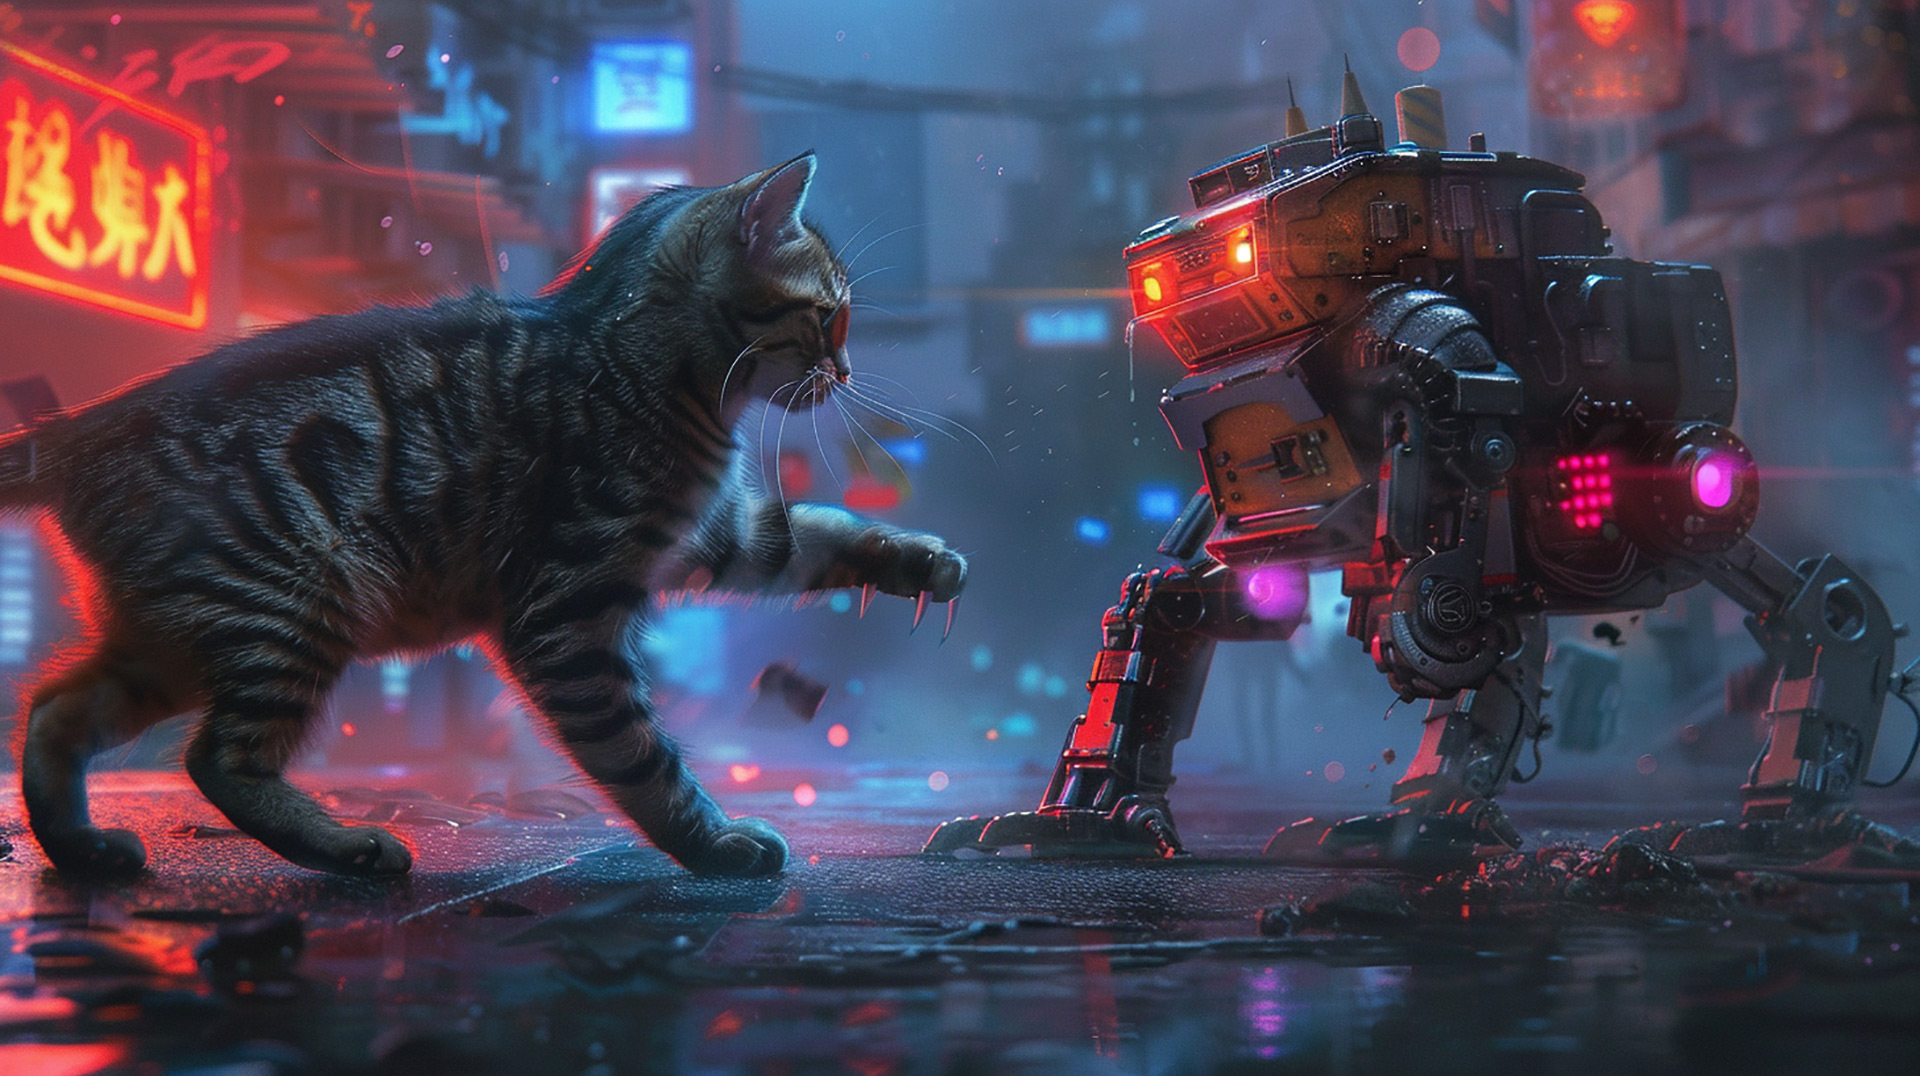 Download Epic Battles of Robot Cats in 4K Resolution